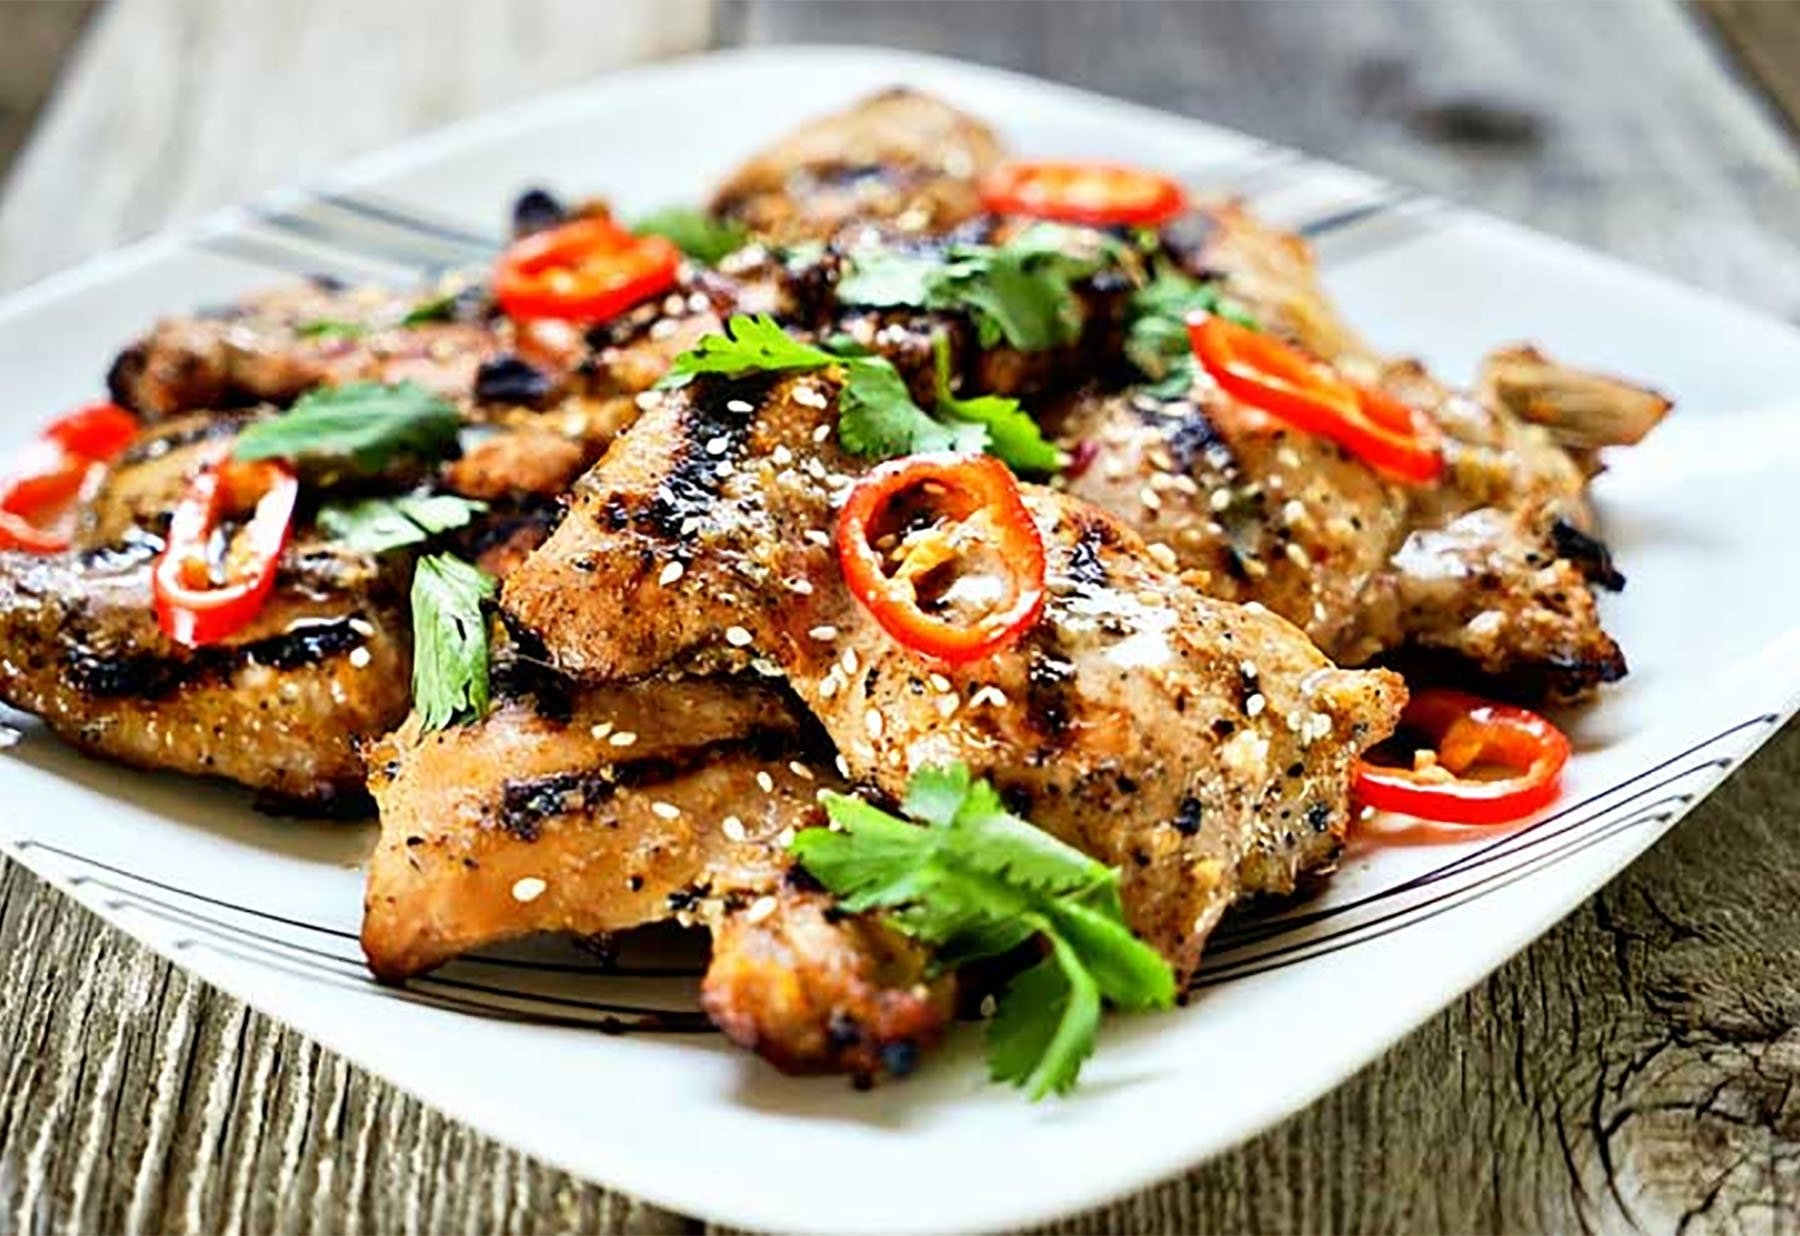 10 Beautiful Healthy Dinner Ideas For Two chicken breast recipes 60 ways to spice up boring poultry greatist 2022